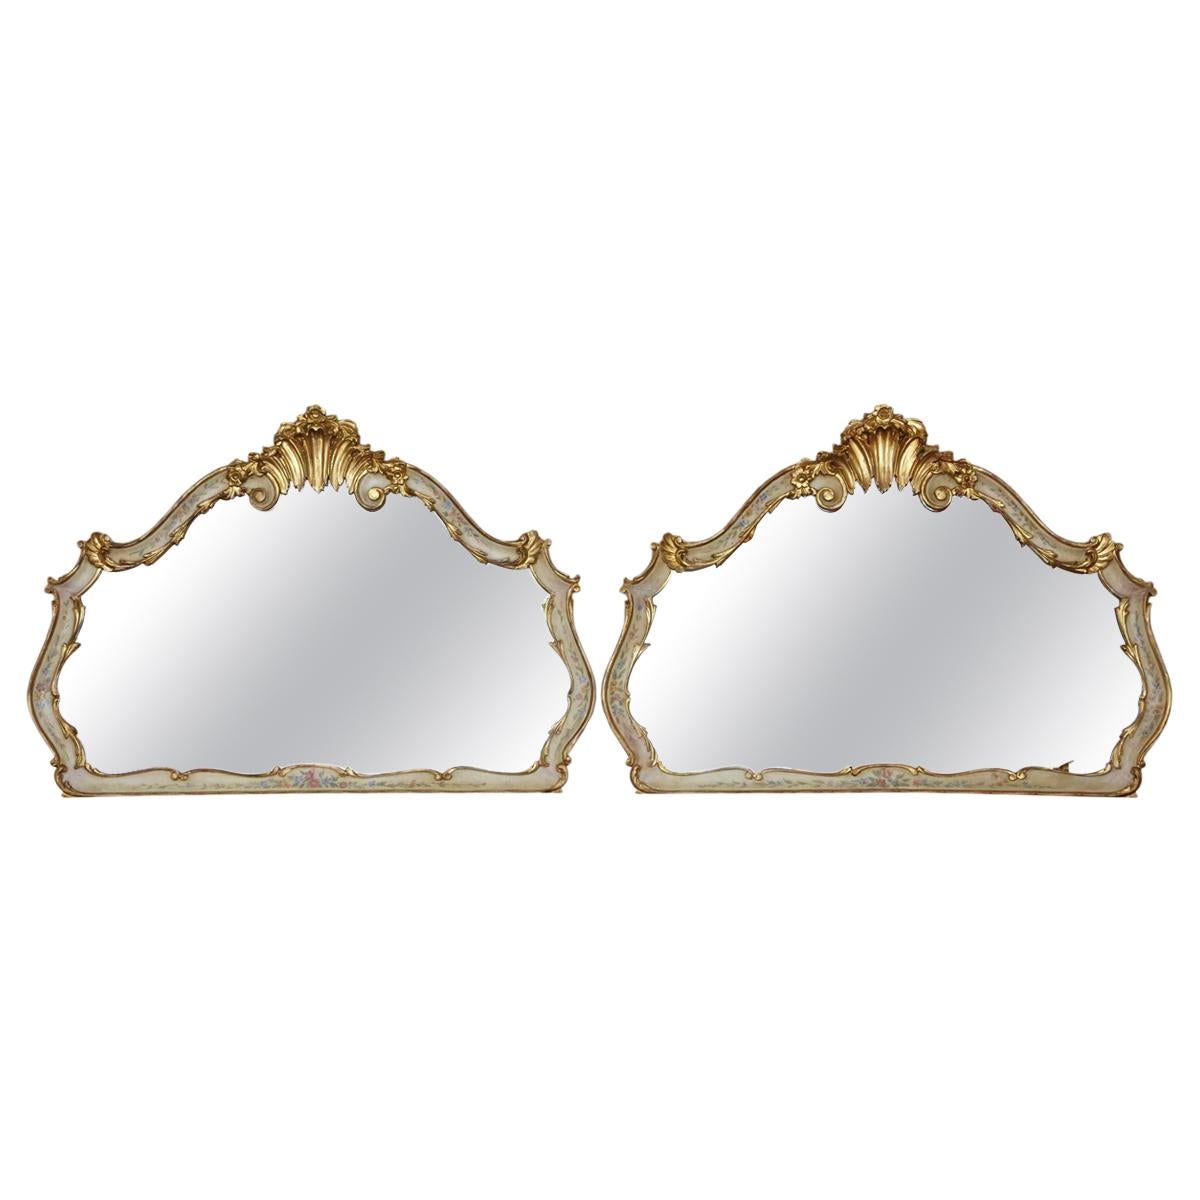 Antique Pair of Large Decorated Gilt Wall Mirrors, 19th Century